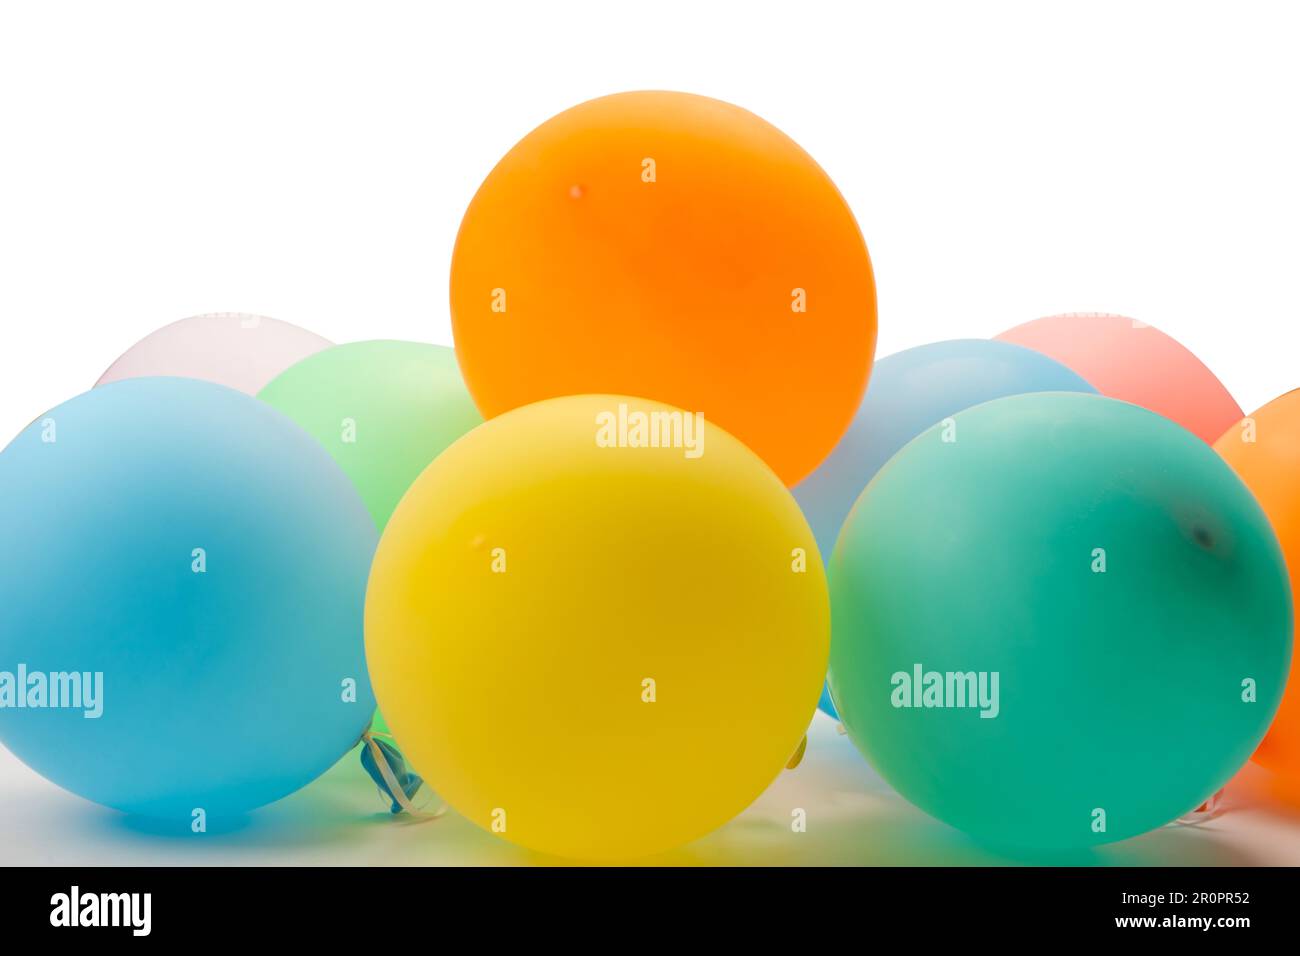 A Ballon isolated on a white background. Copy space. Stock Photo